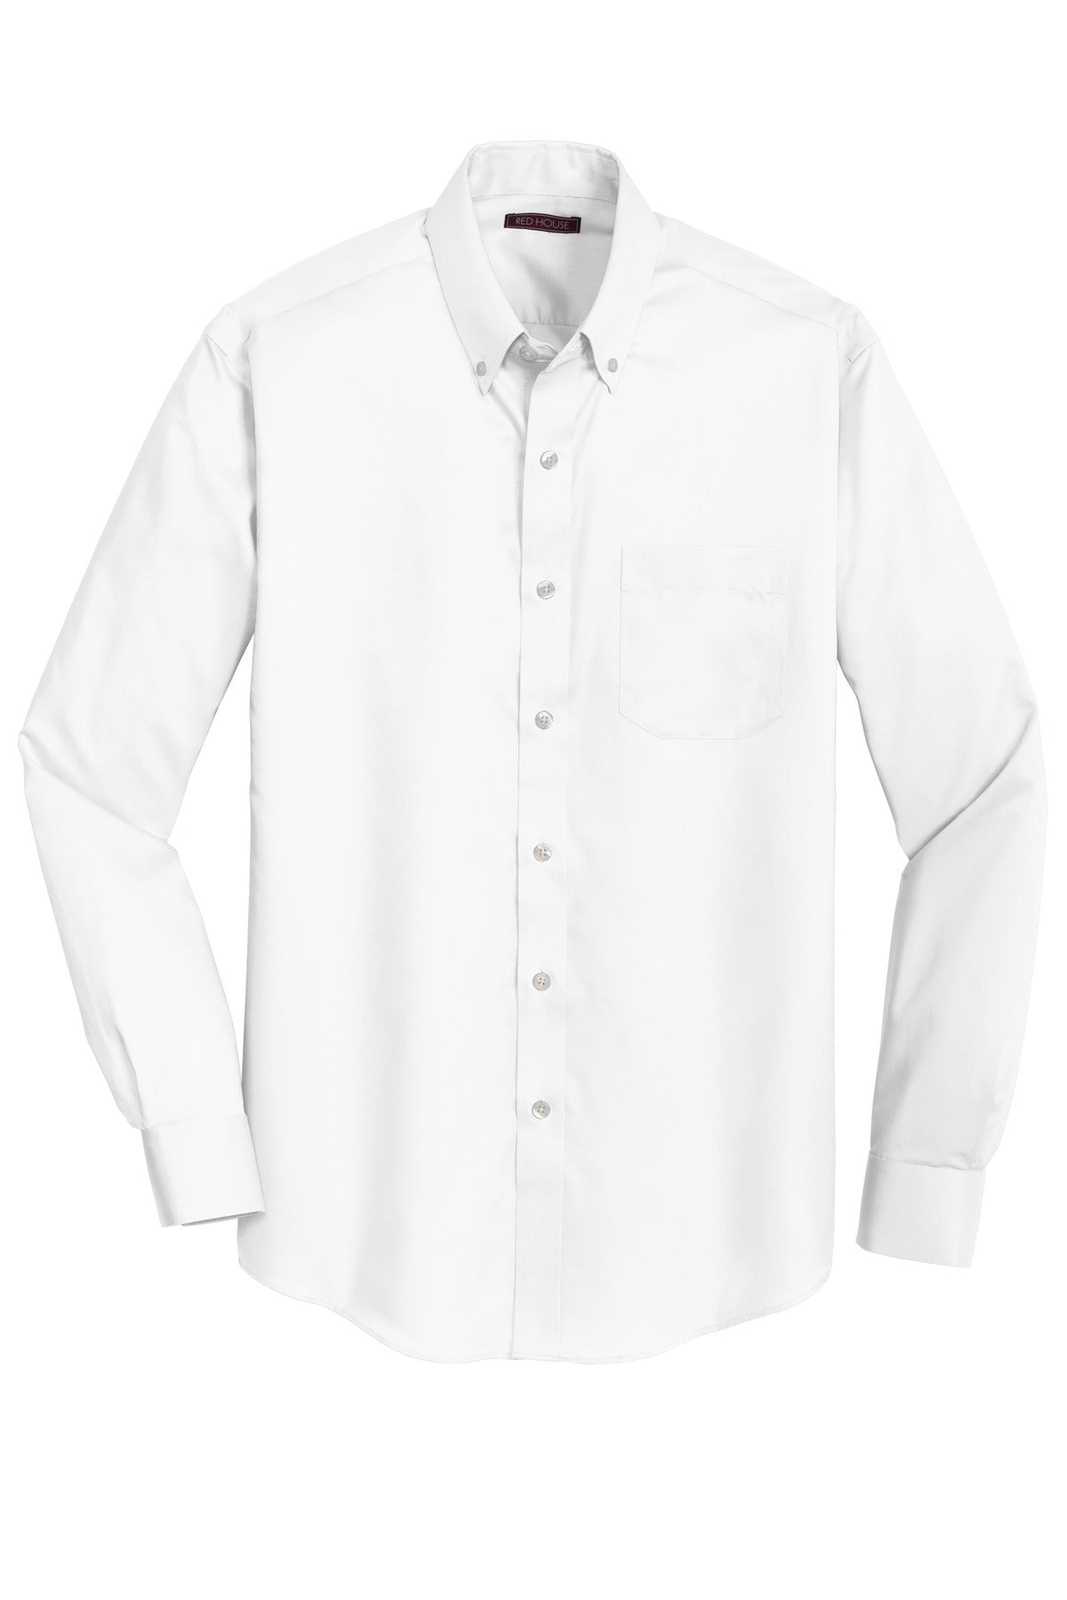 Red House RH78 Non-Iron Twill Shirt - White - HIT a Double - 5